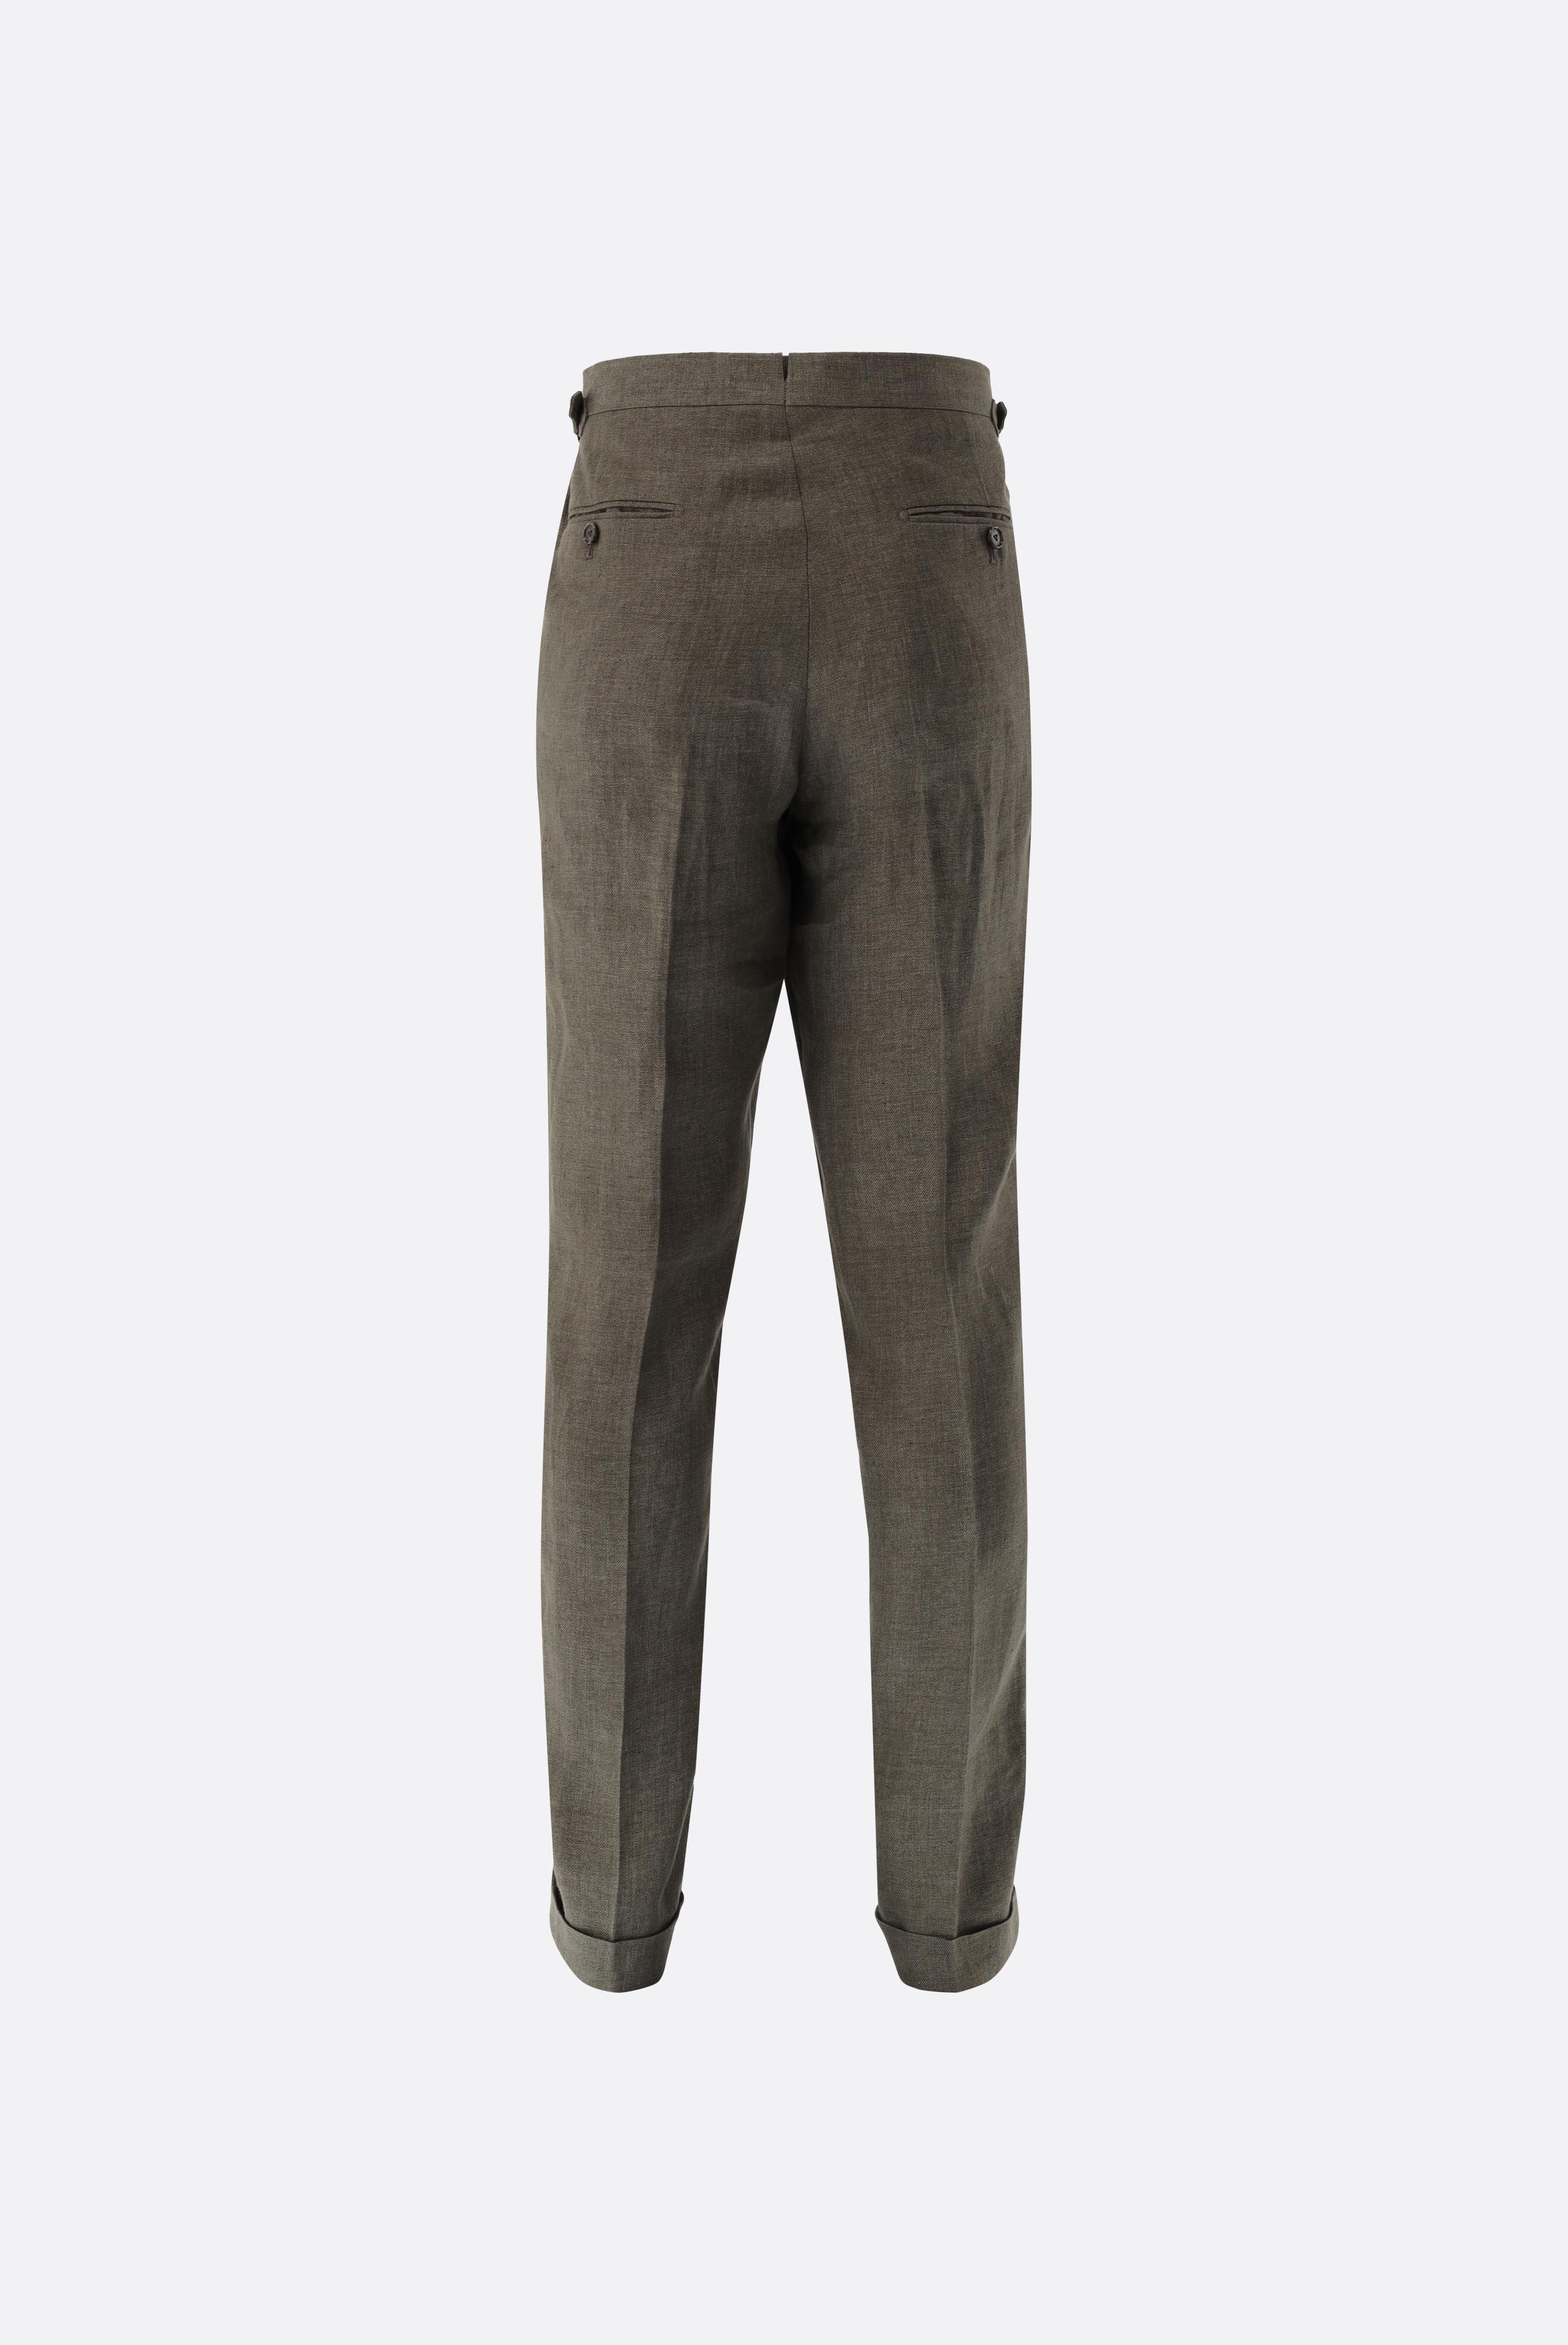 Jeans & Trousers+Linen trousers with pleats+20.7814.15.H55027.169.46